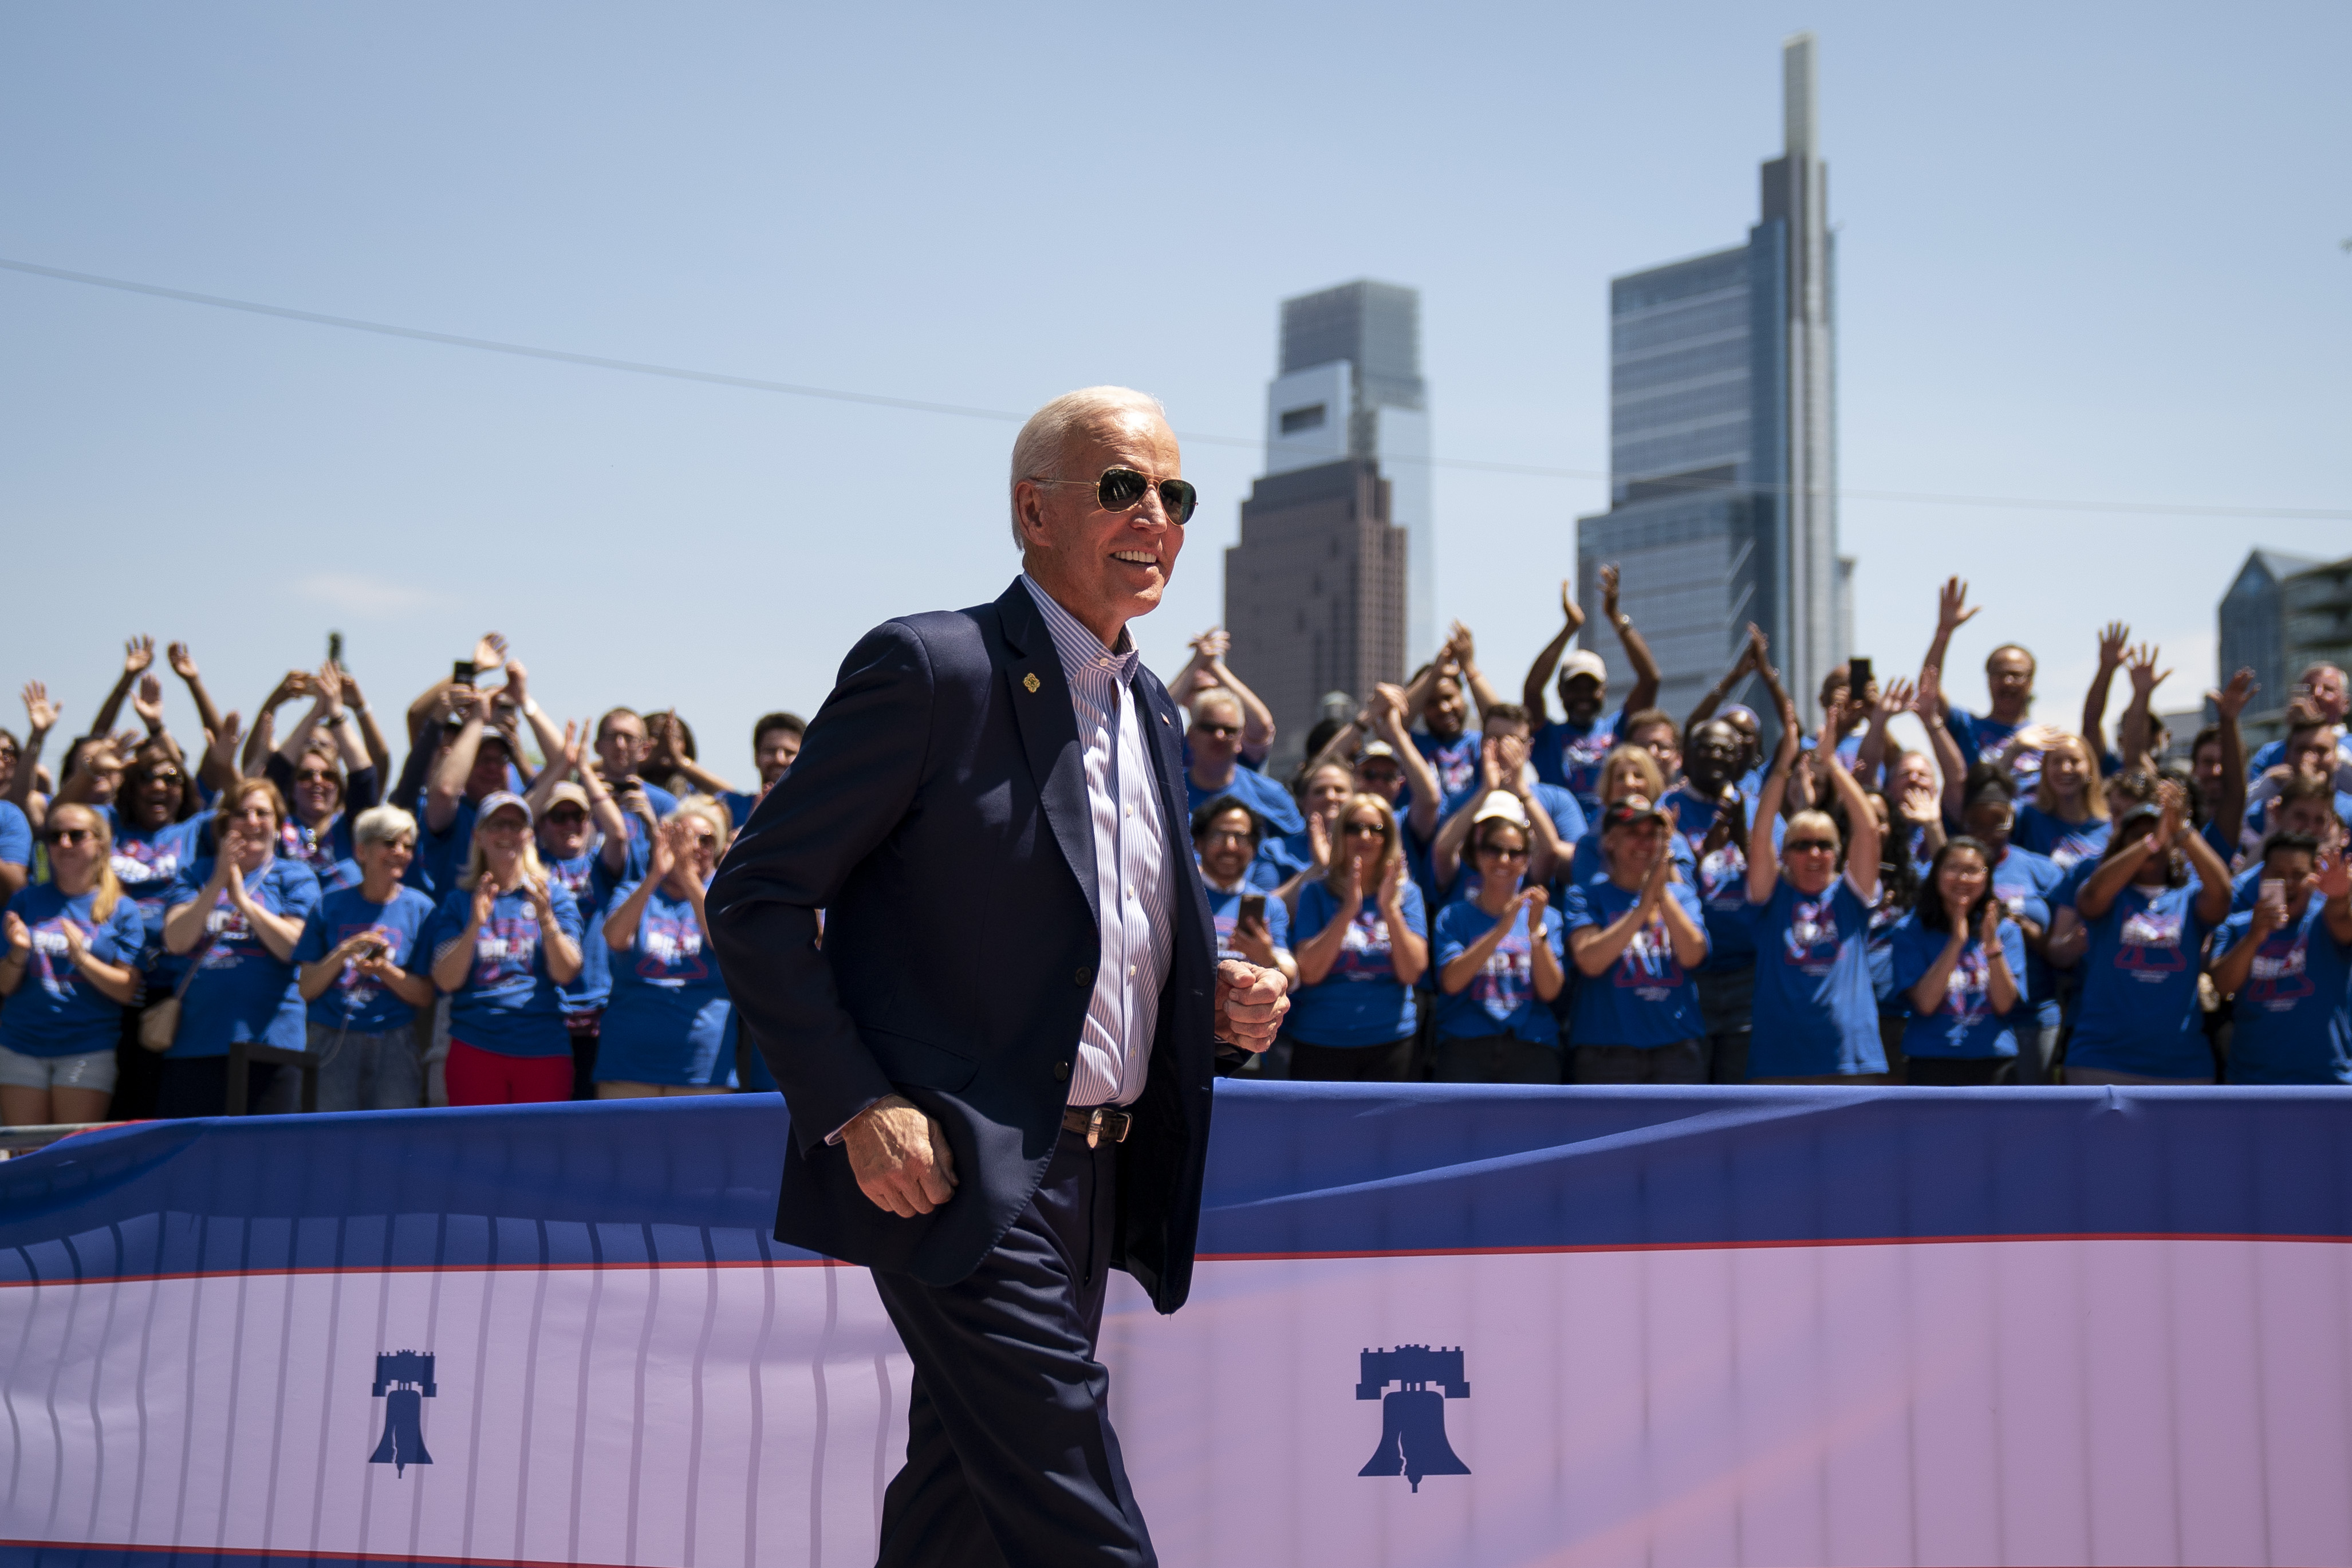 PHILADELPHIA, PA - MAY 18: Former U.S. Vice President and Democratic presidential candidate Joe Biden arrives for a campaign kickoff rally, May 18, 2019 in Philadelphia, Pennsylvania. Since Biden announced his candidacy in late April, he has taken the top spot in all polls of the sprawling Democratic primary field. Biden's rally on Saturday was his first large-scale campaign rally after doing smaller events in Iowa and New Hampshire in the past few weeks. (Photo by Drew Angerer/Getty Images)